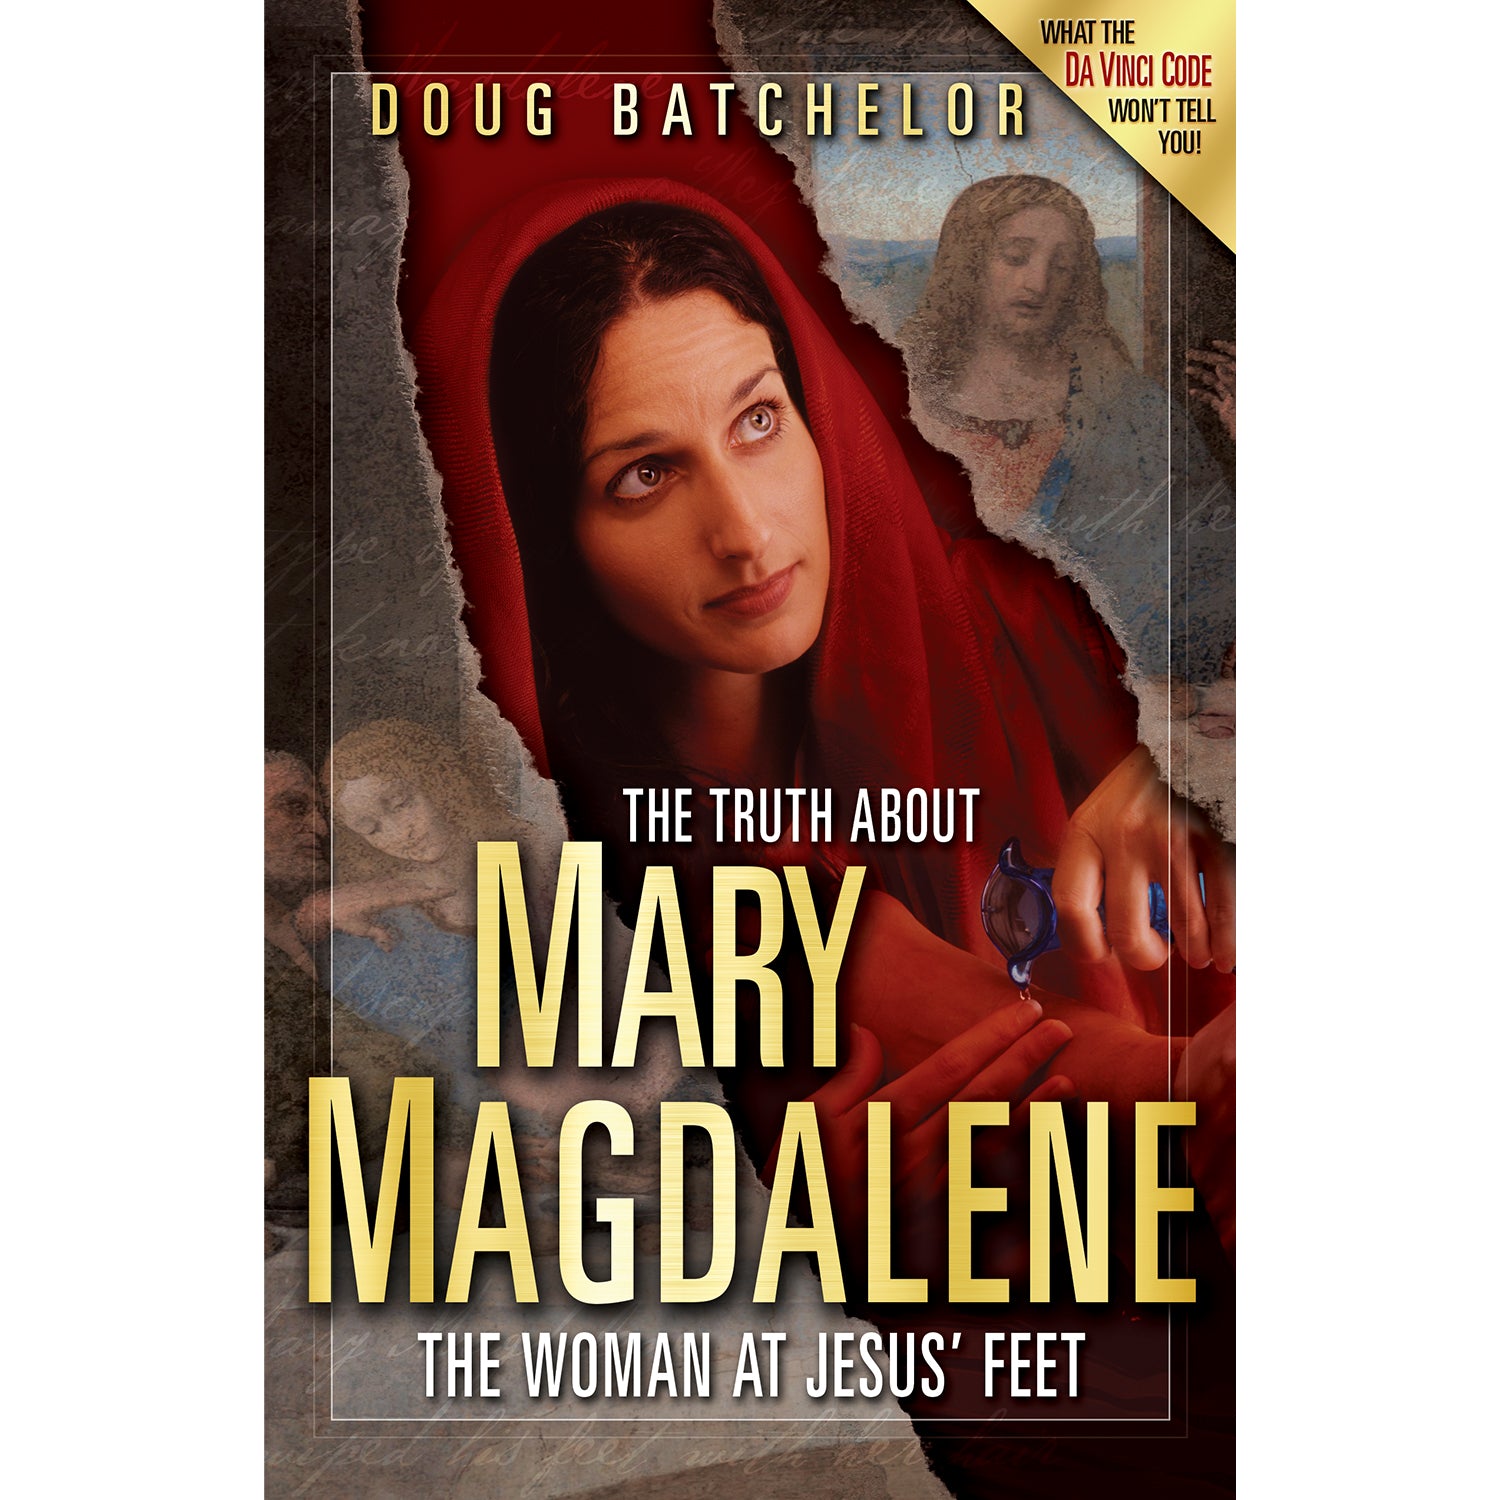 The Truth About Mary Magdalene by Doug Batchelor